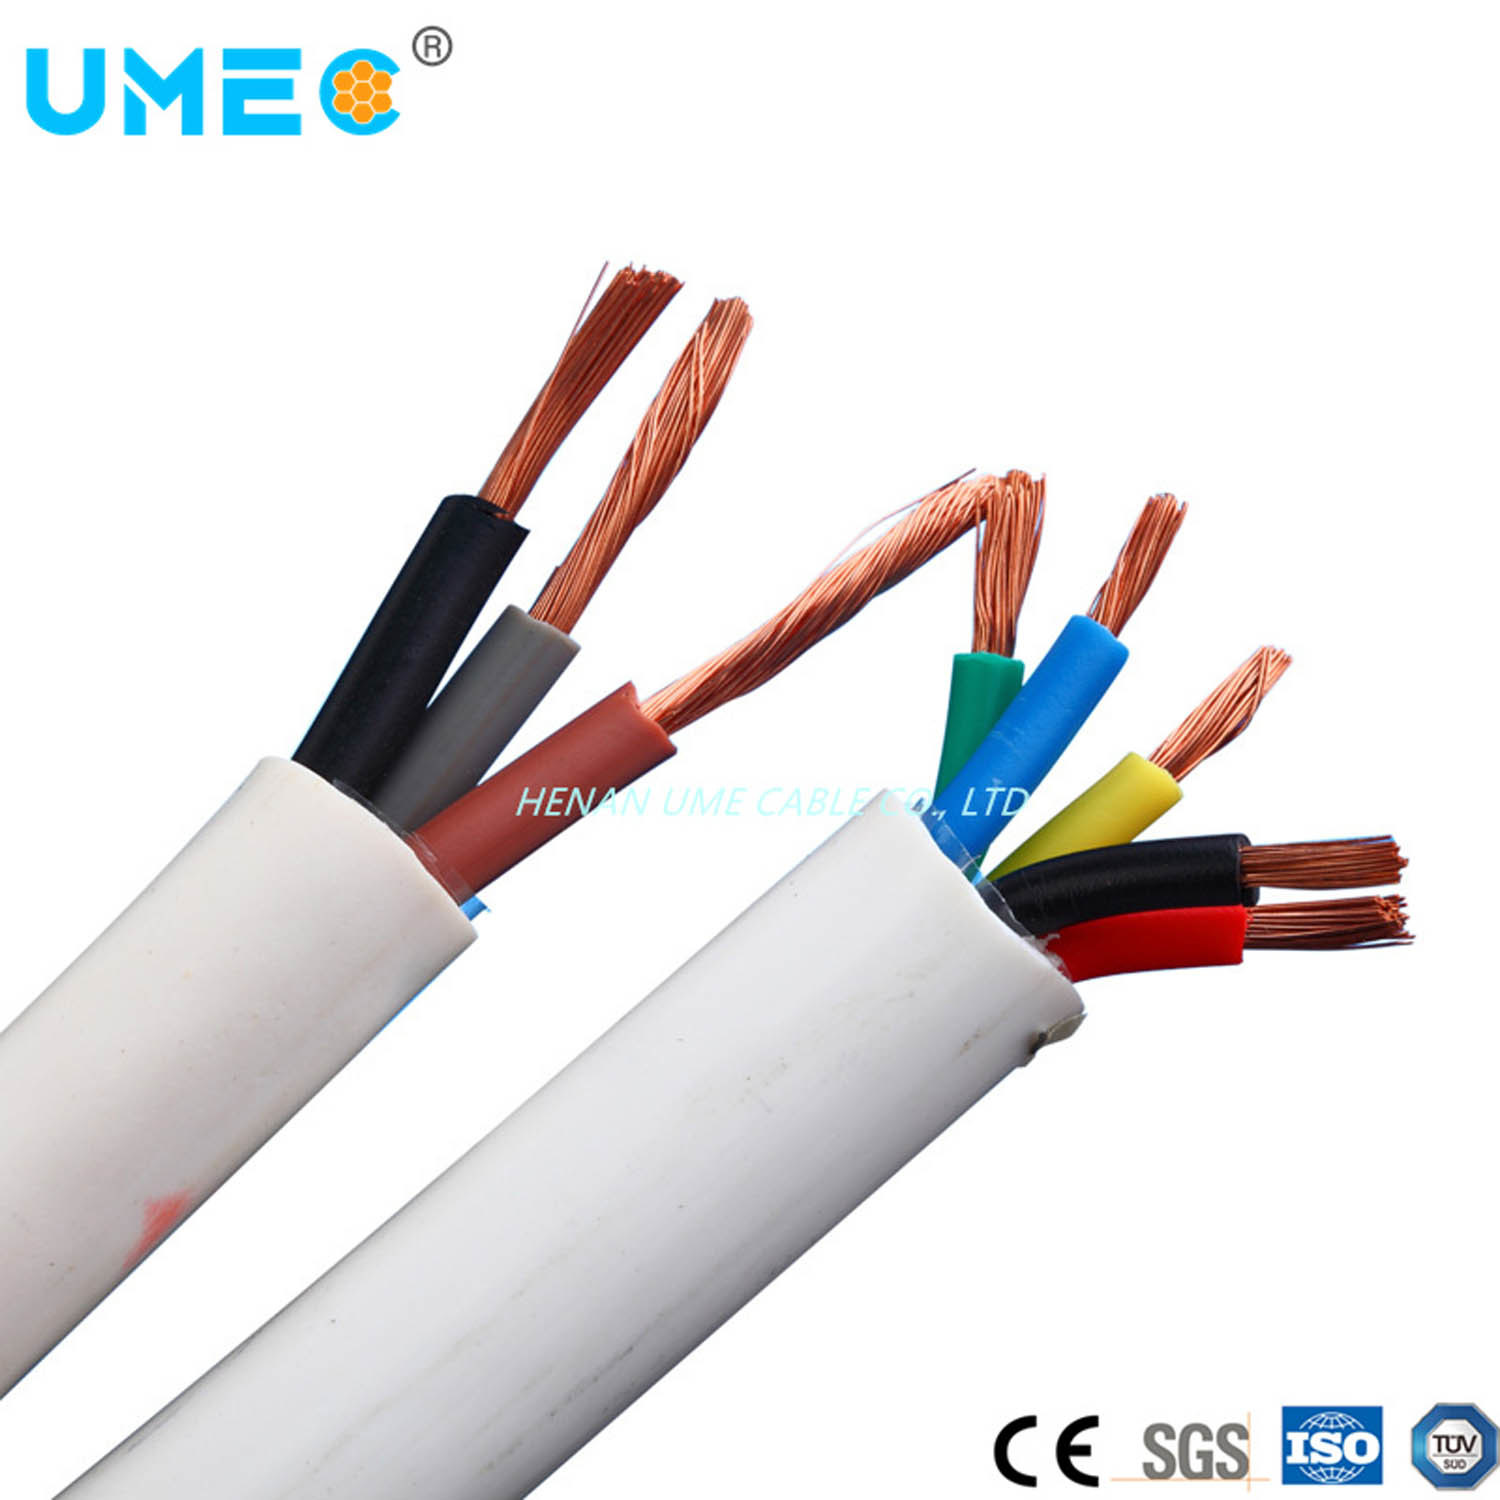 0.5mm2 0.75mm2 300/300V Power Cable PVC Insulated Sheathed Cable H03vvf